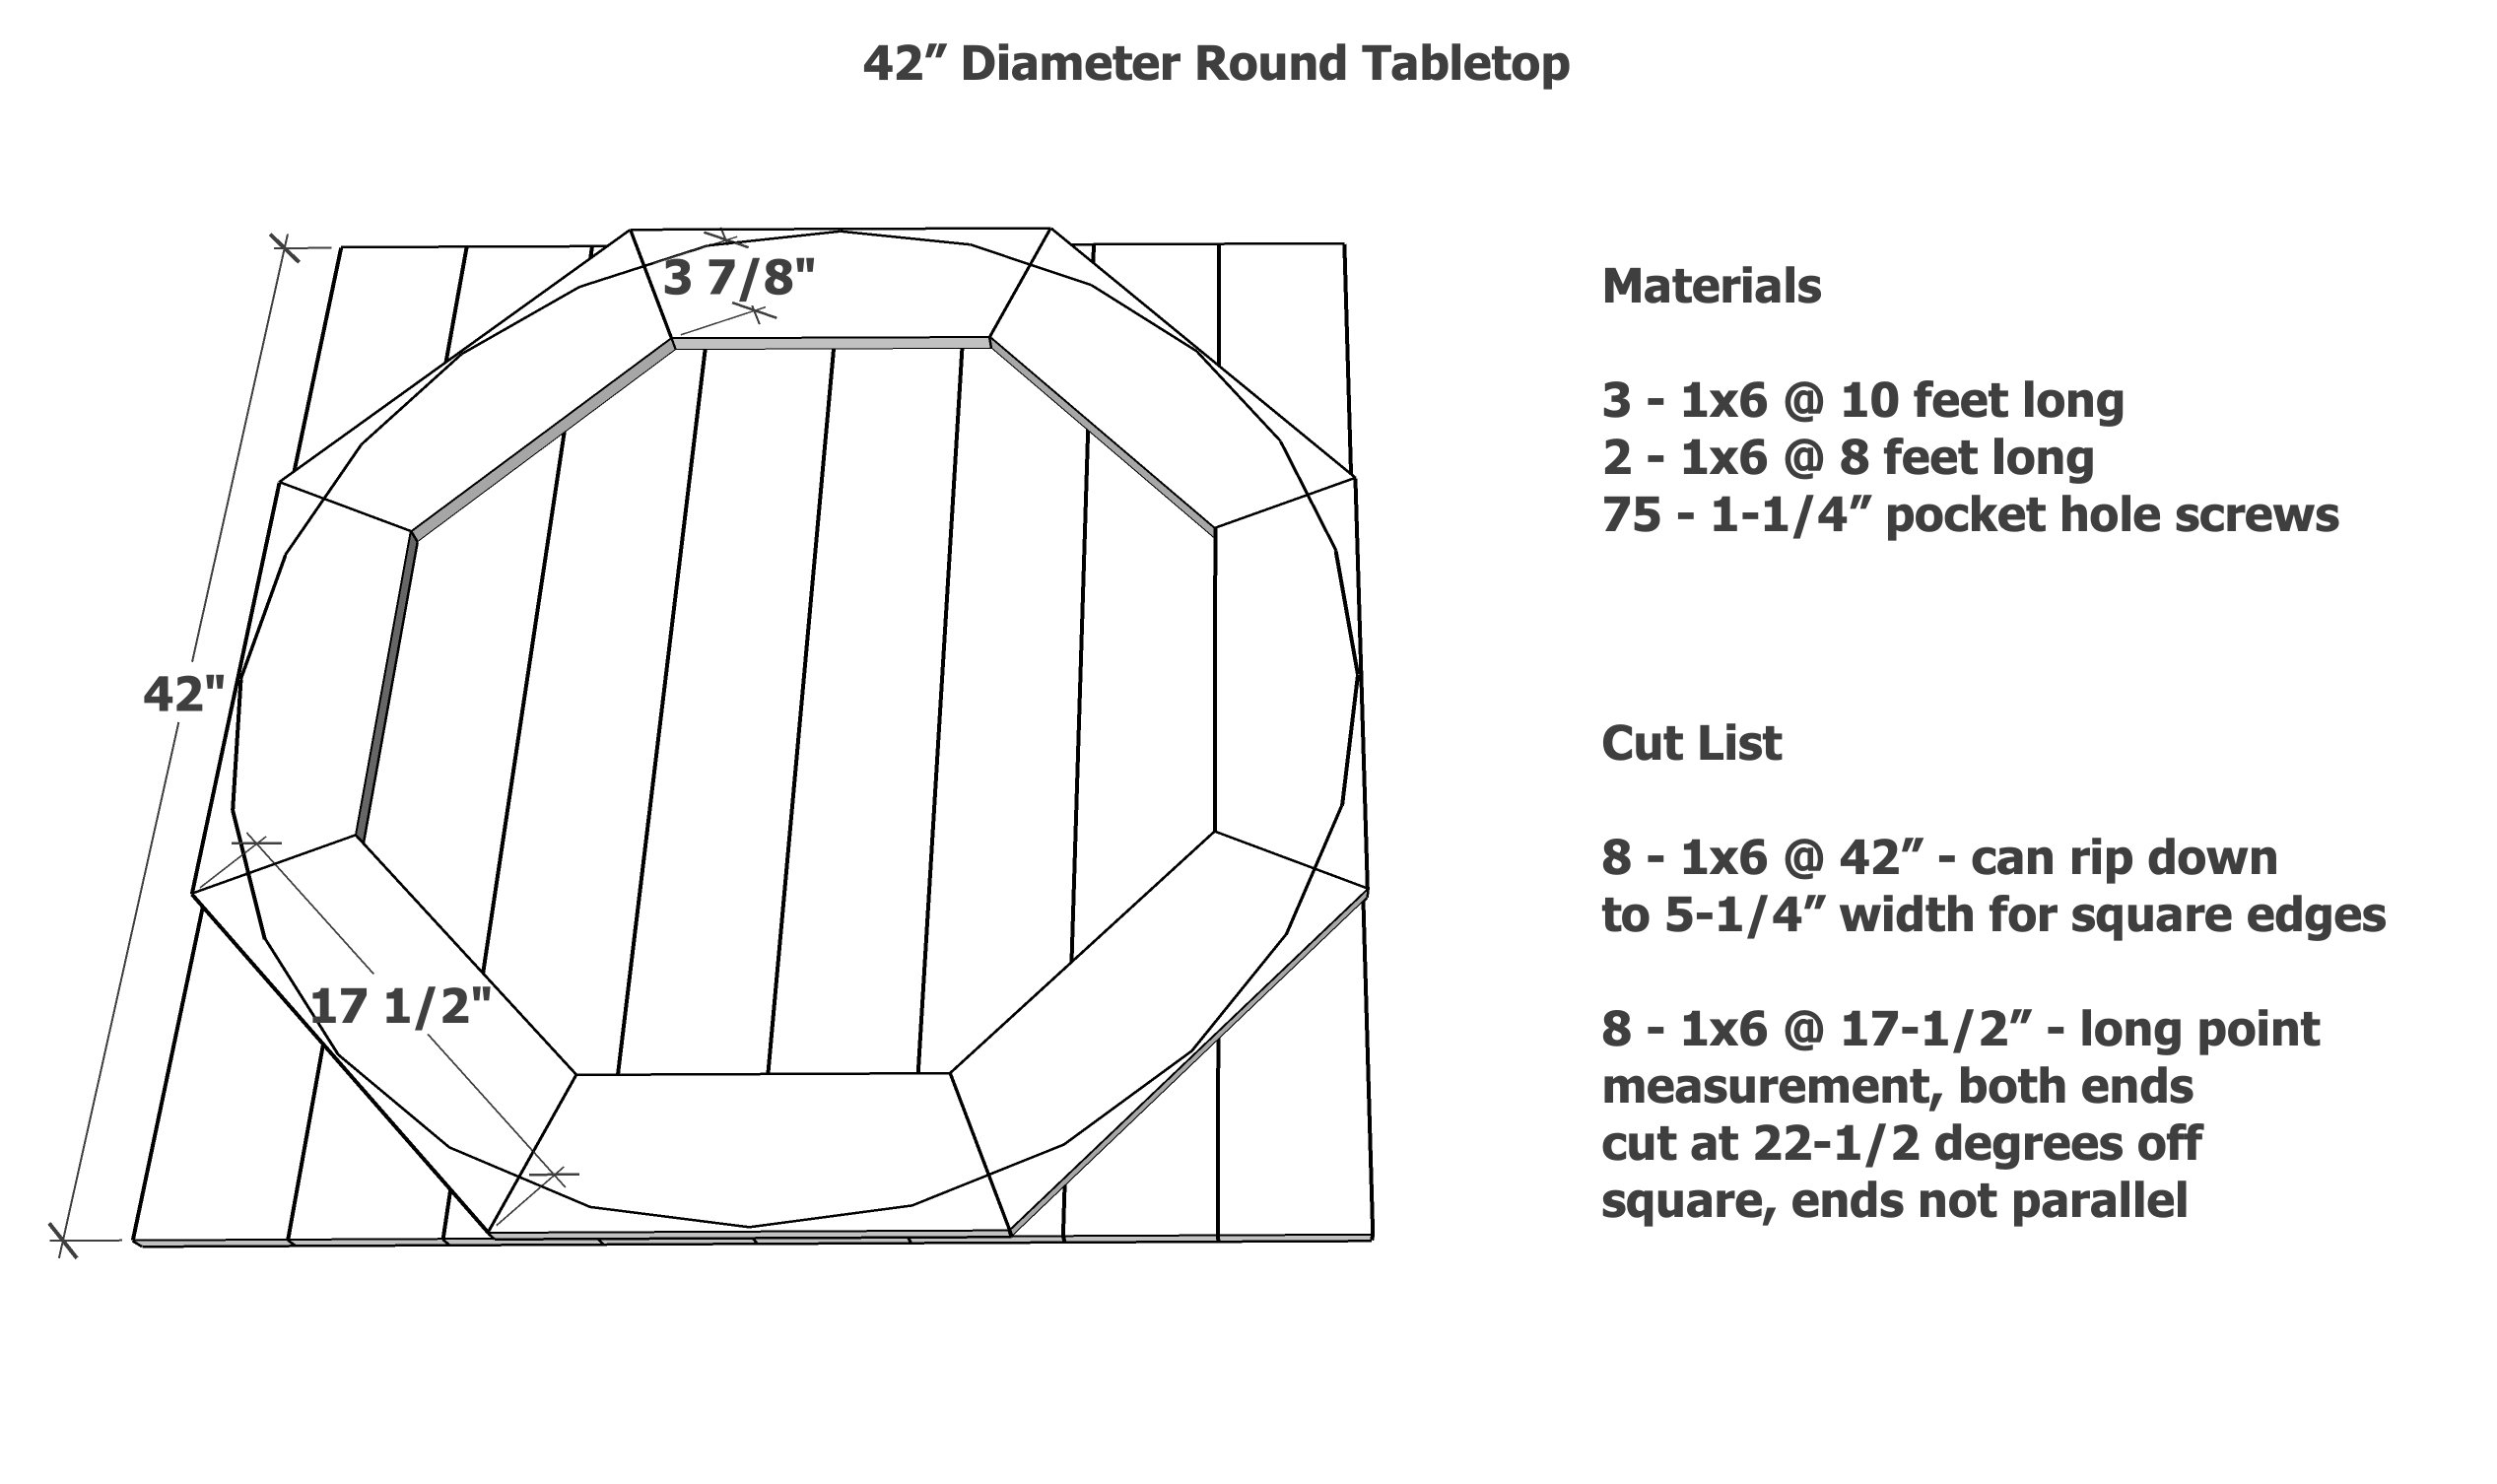 How to Build a Round Table Top with Free Patterns in Different Sizes